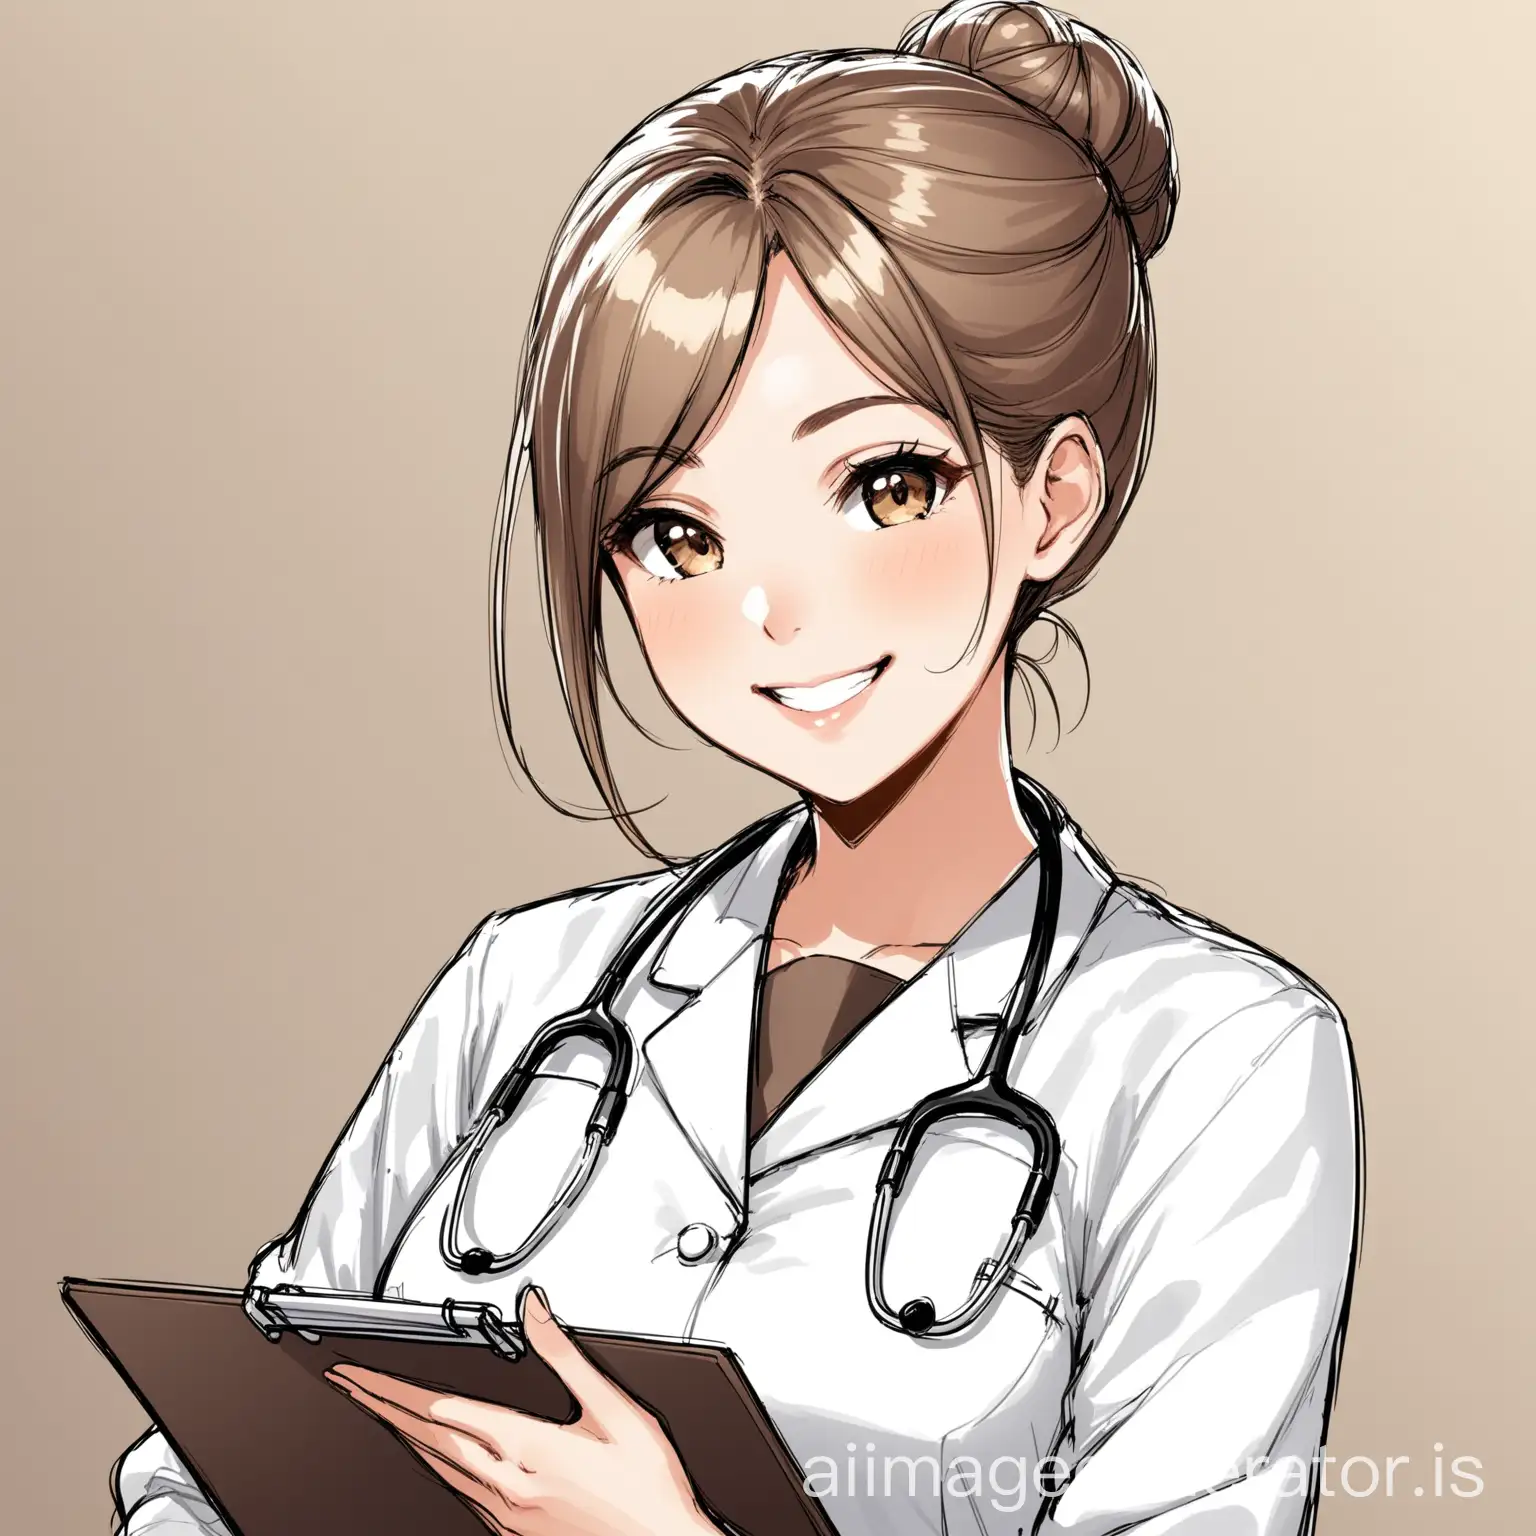 Smiling-Female-Doctor-with-Clipboard-in-Full-Frame-Sketch